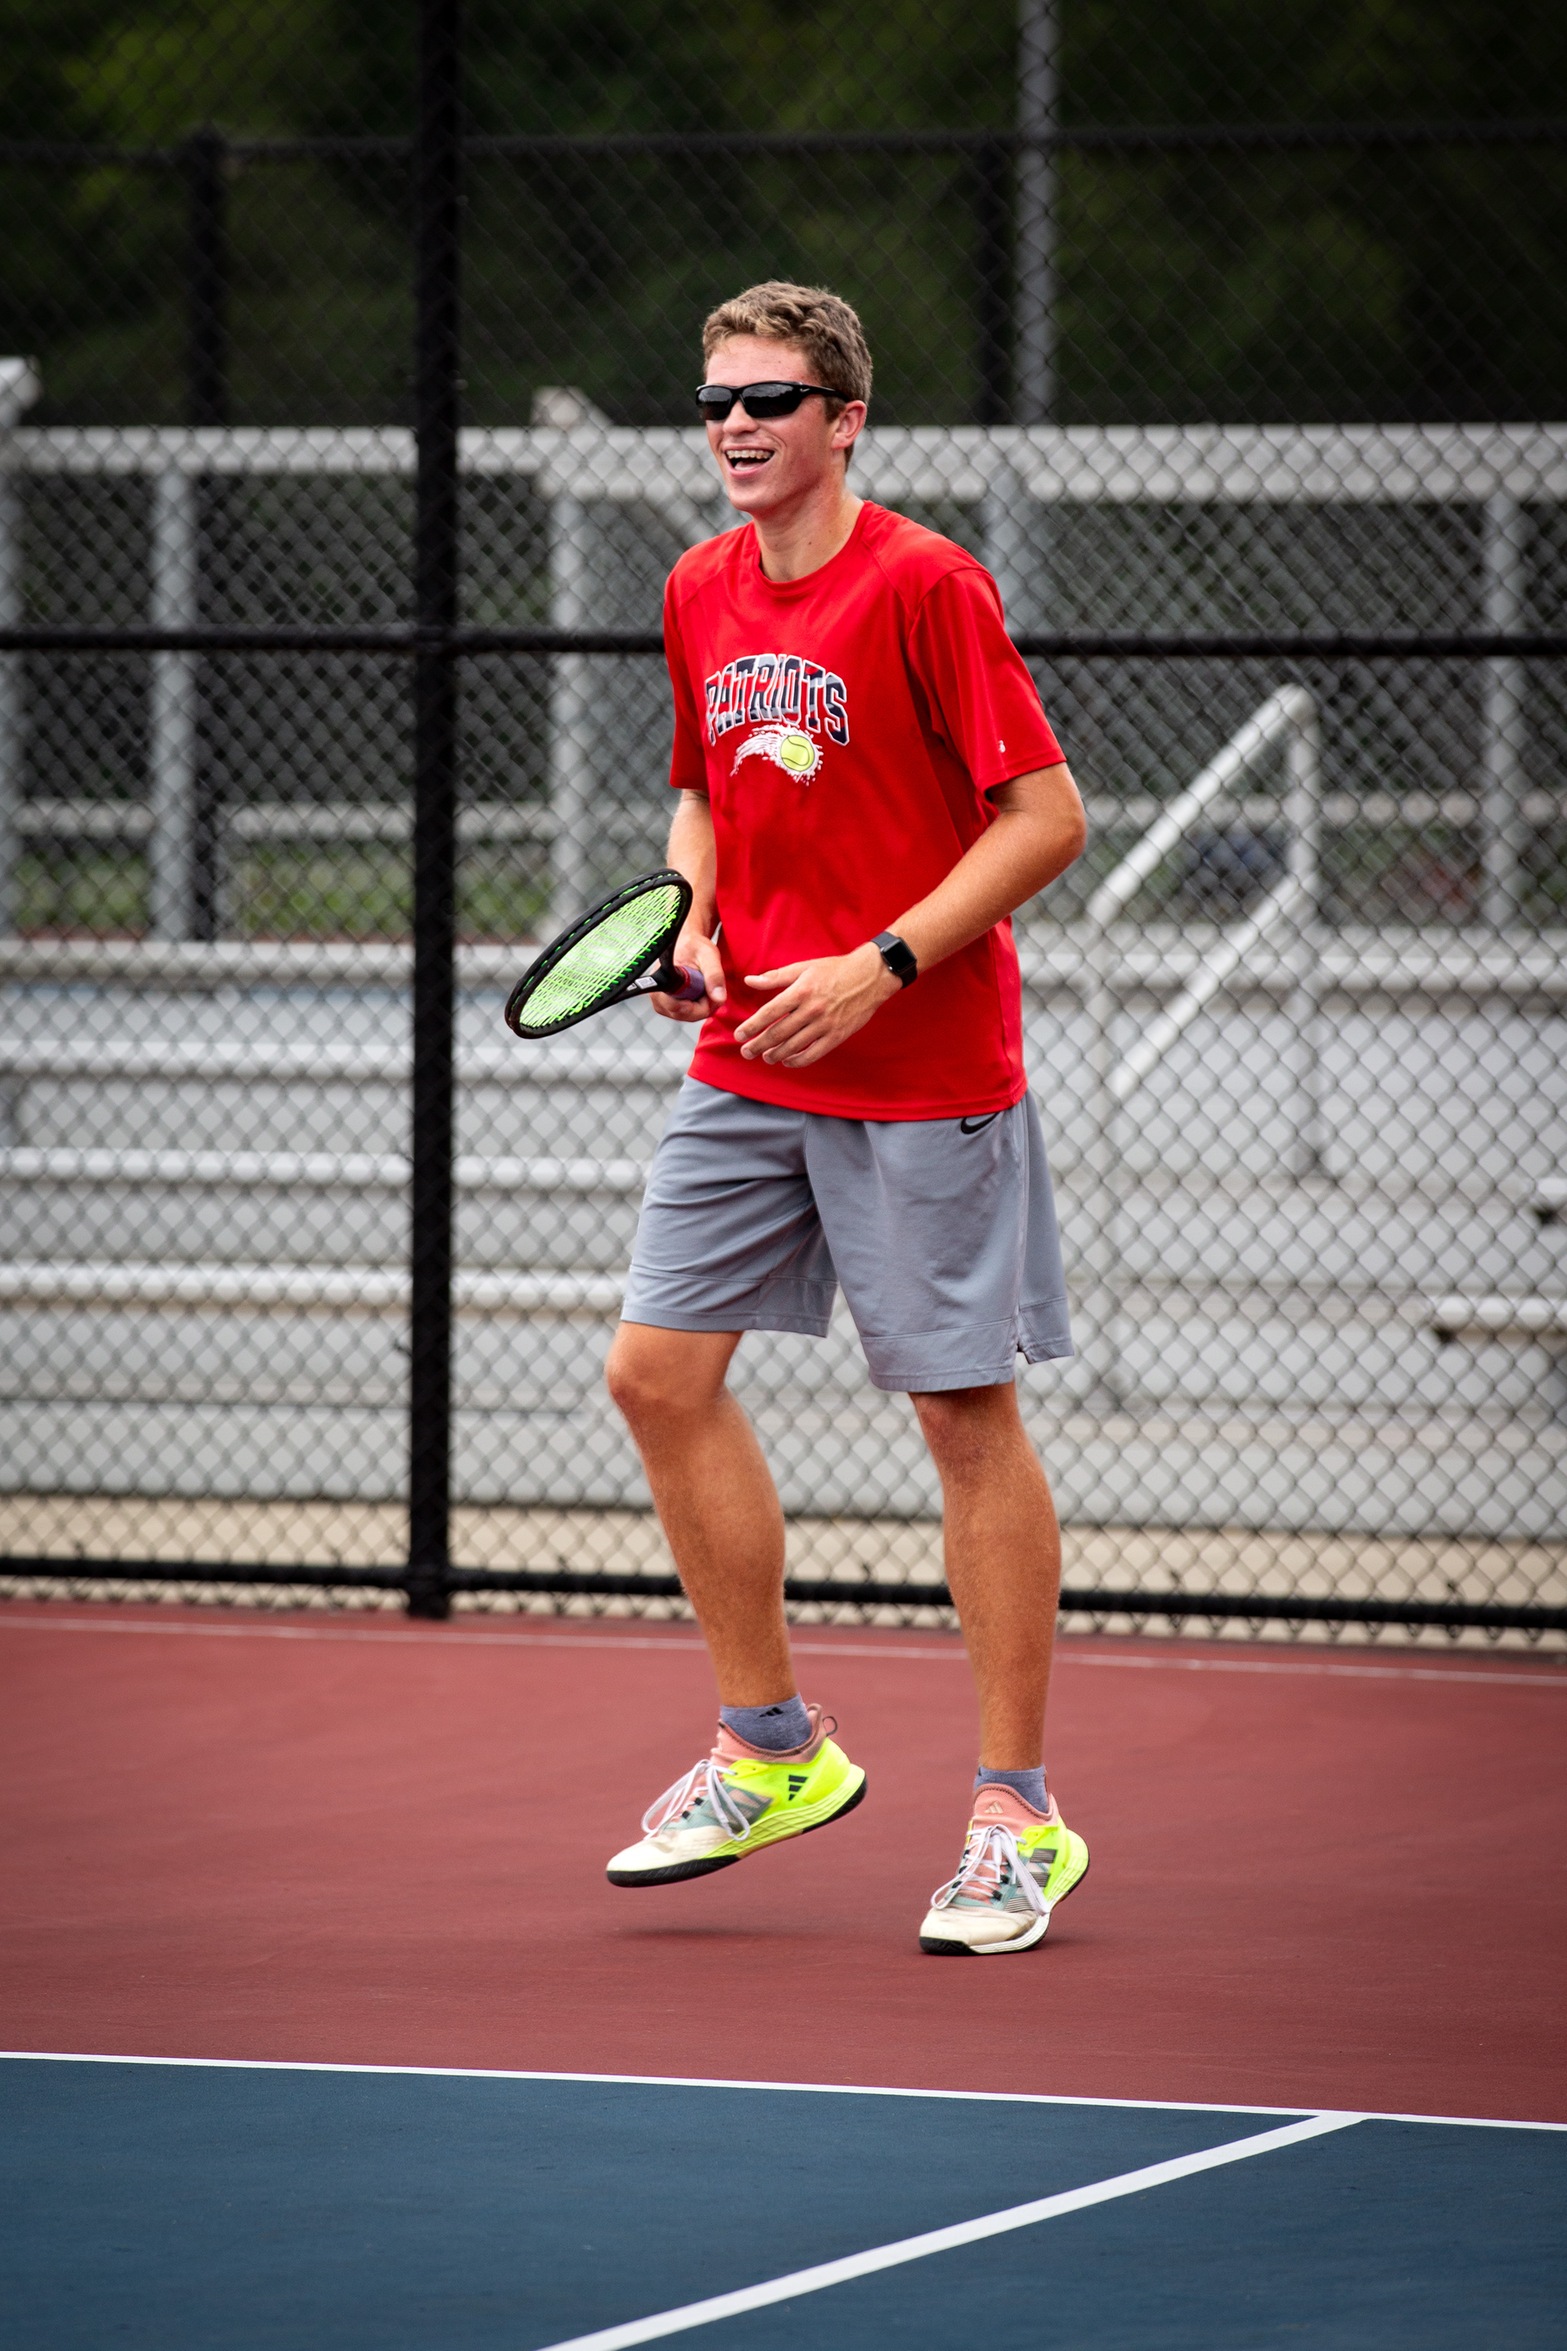 Heritage Hills Boys Tennis Advances to Sectional Championship